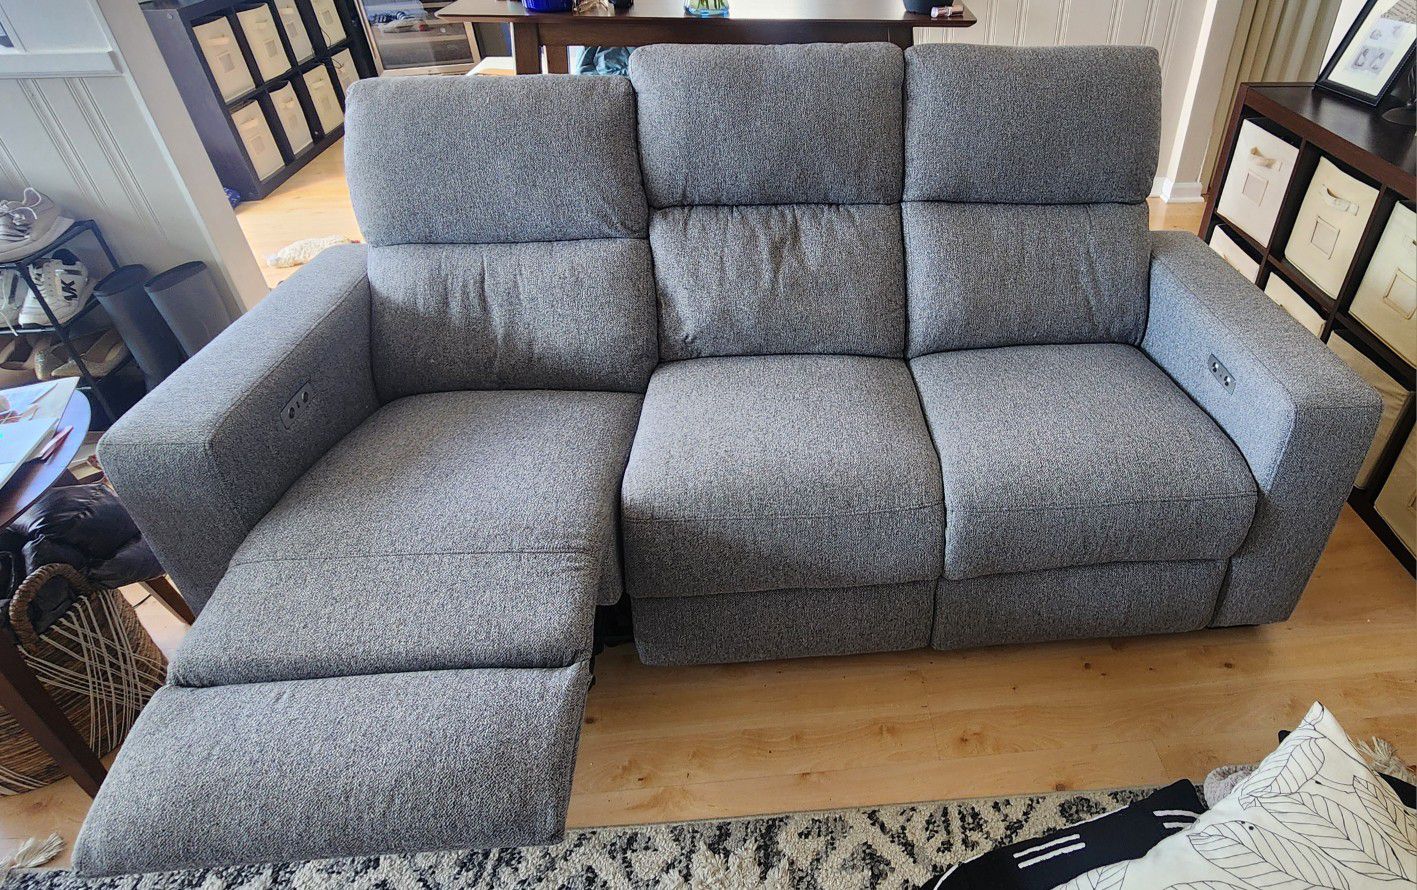 Gray Power Reclining Couch 